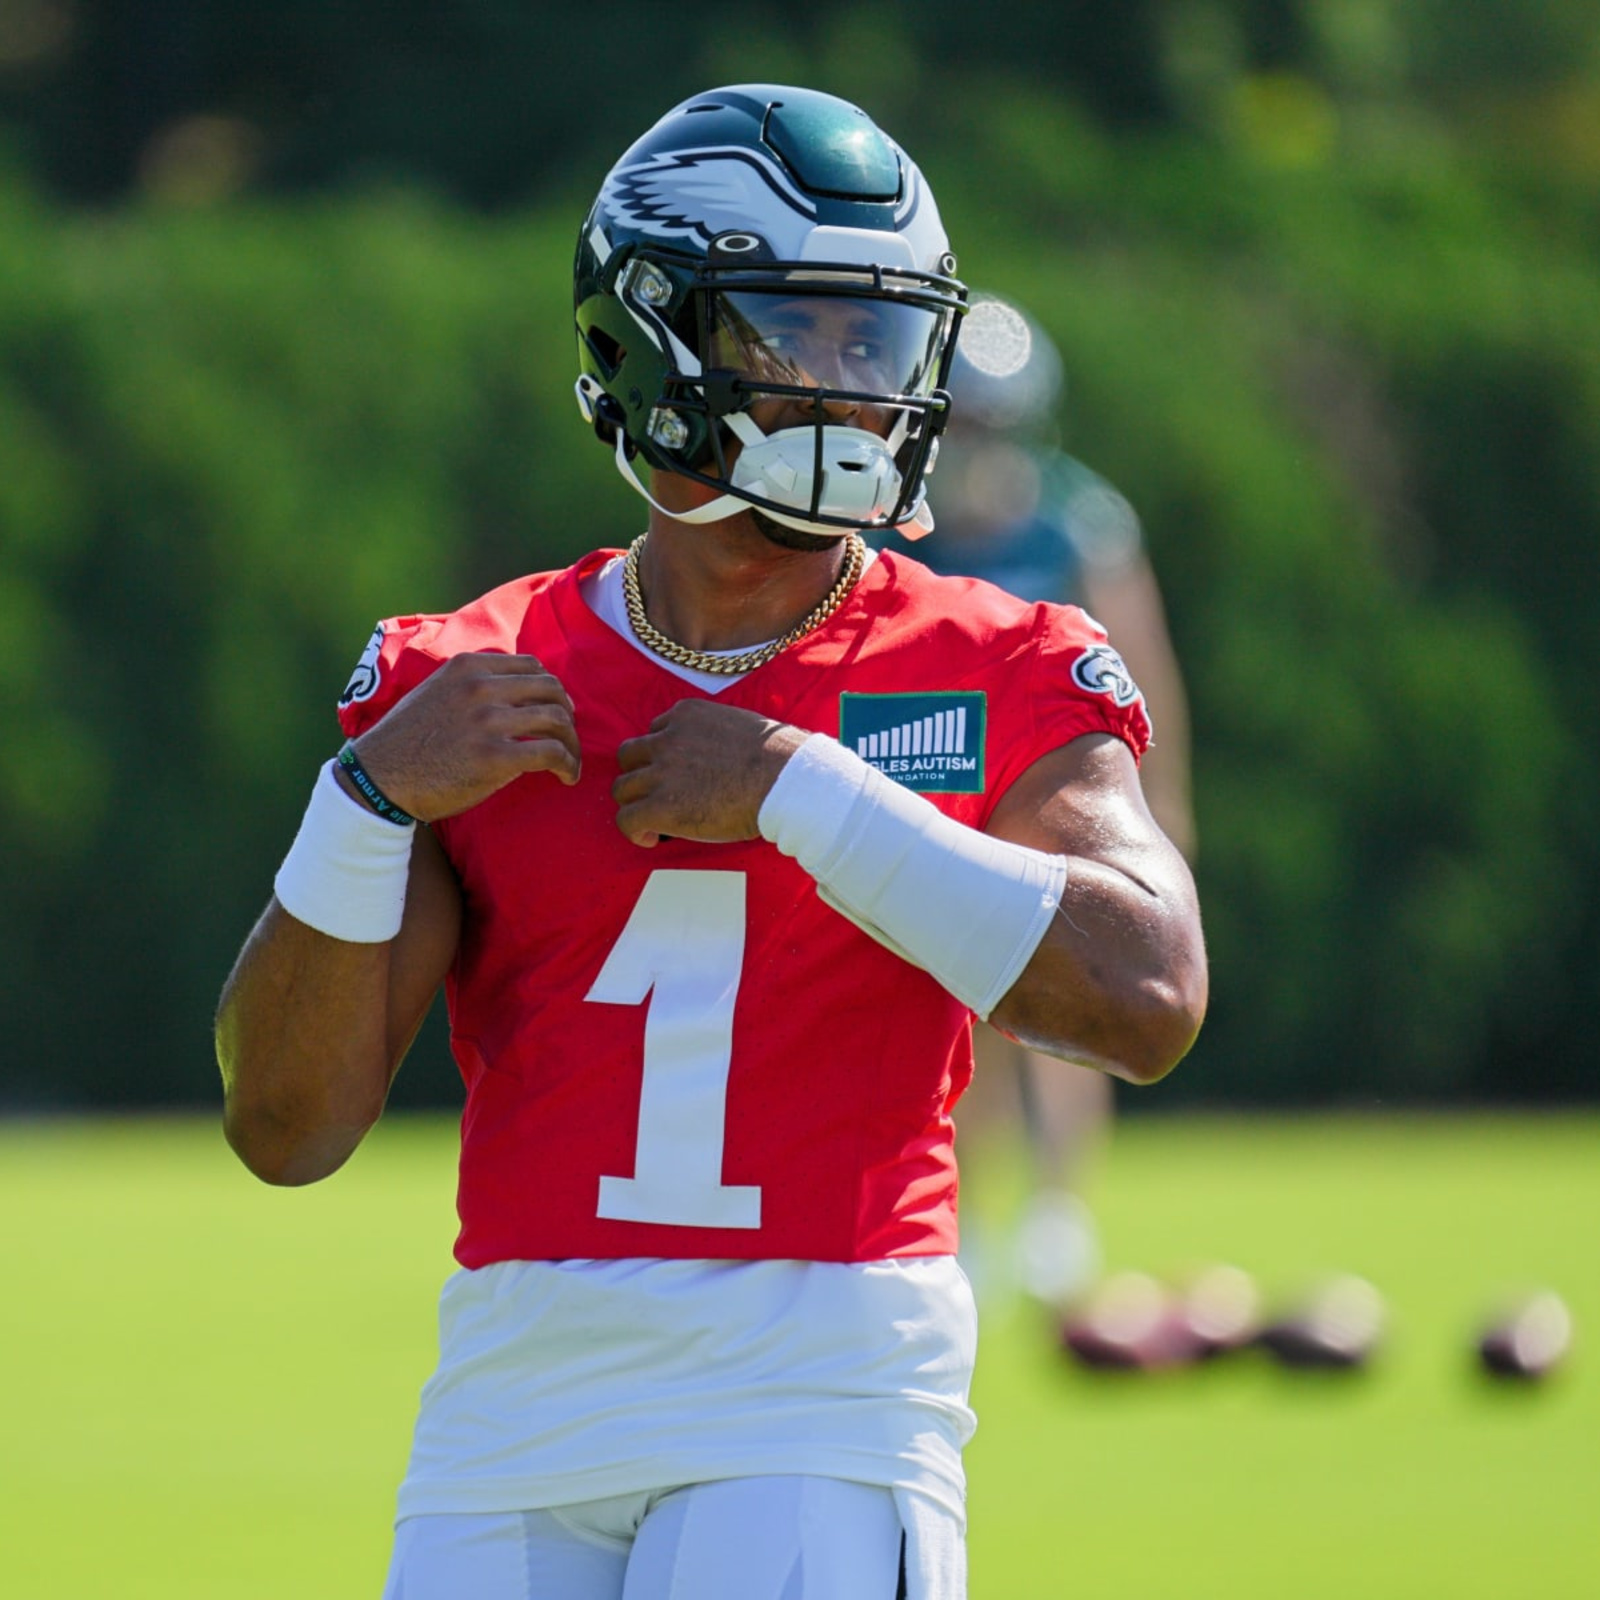 The Philadelphia Eagles should seriously consider trading Jalen Hurts